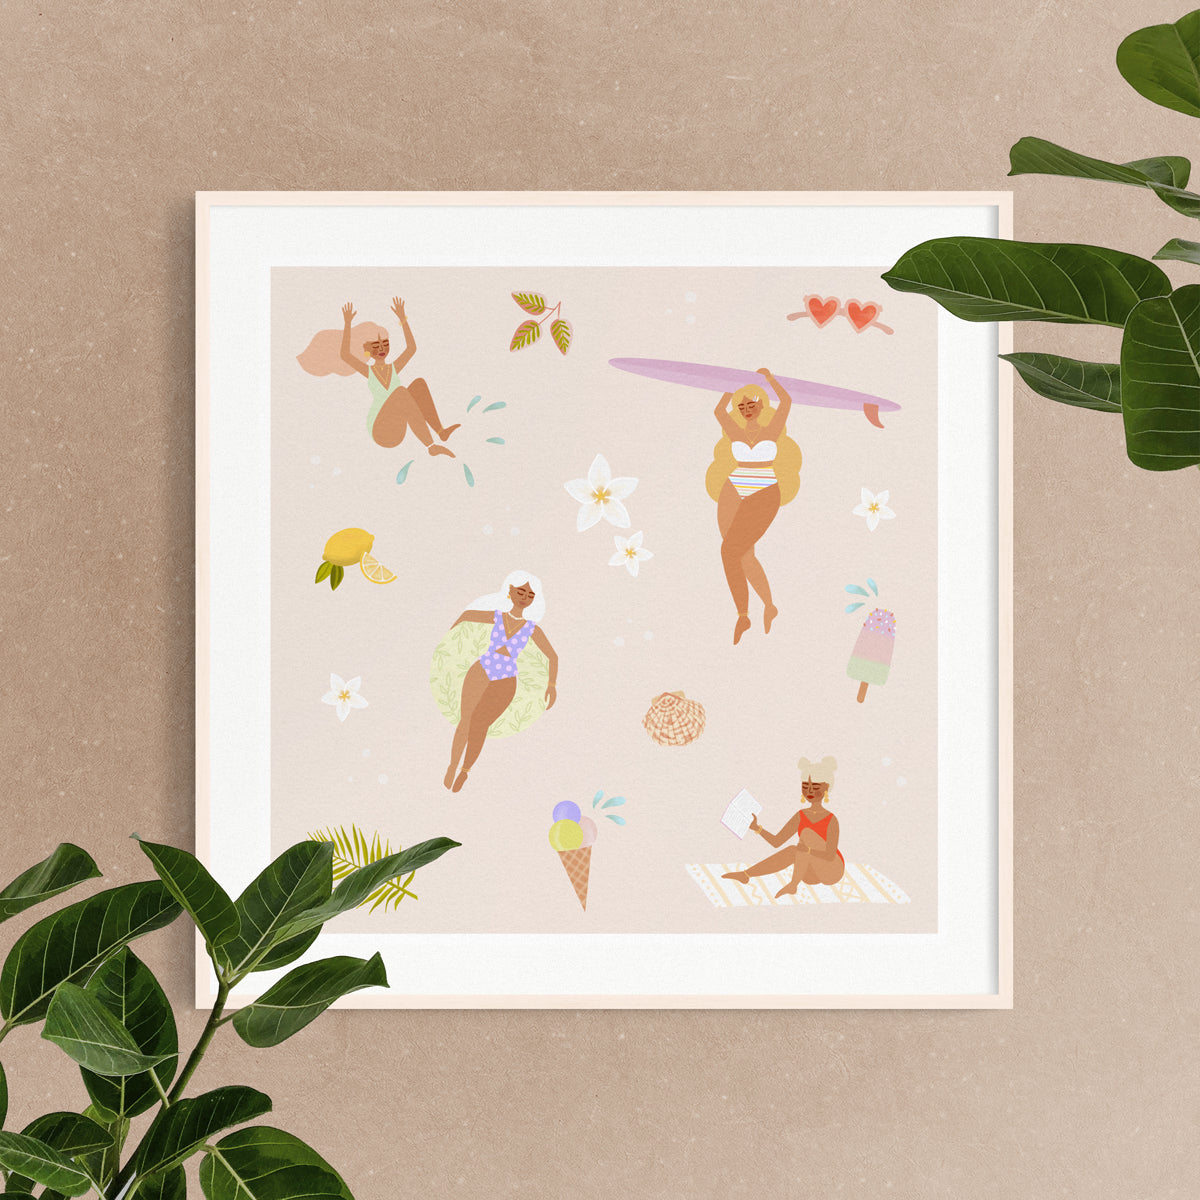 Affiche 20x20 cm • Illustration "Summer Things"